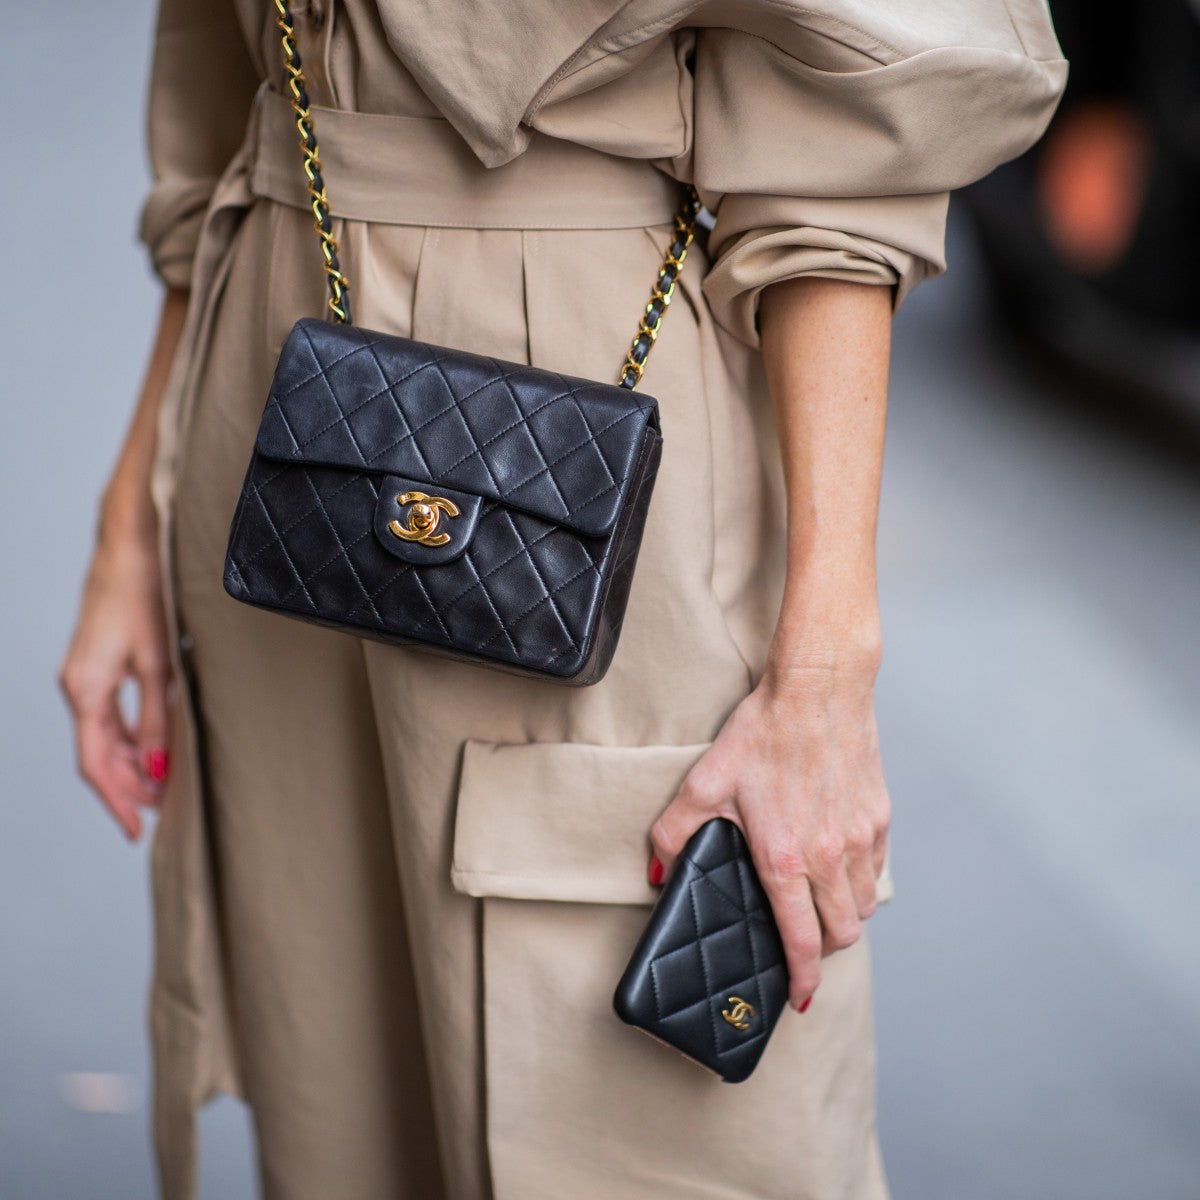 Vintage Chanel vs. New - Why Vintage Chanel is Having a Moment – Sellier